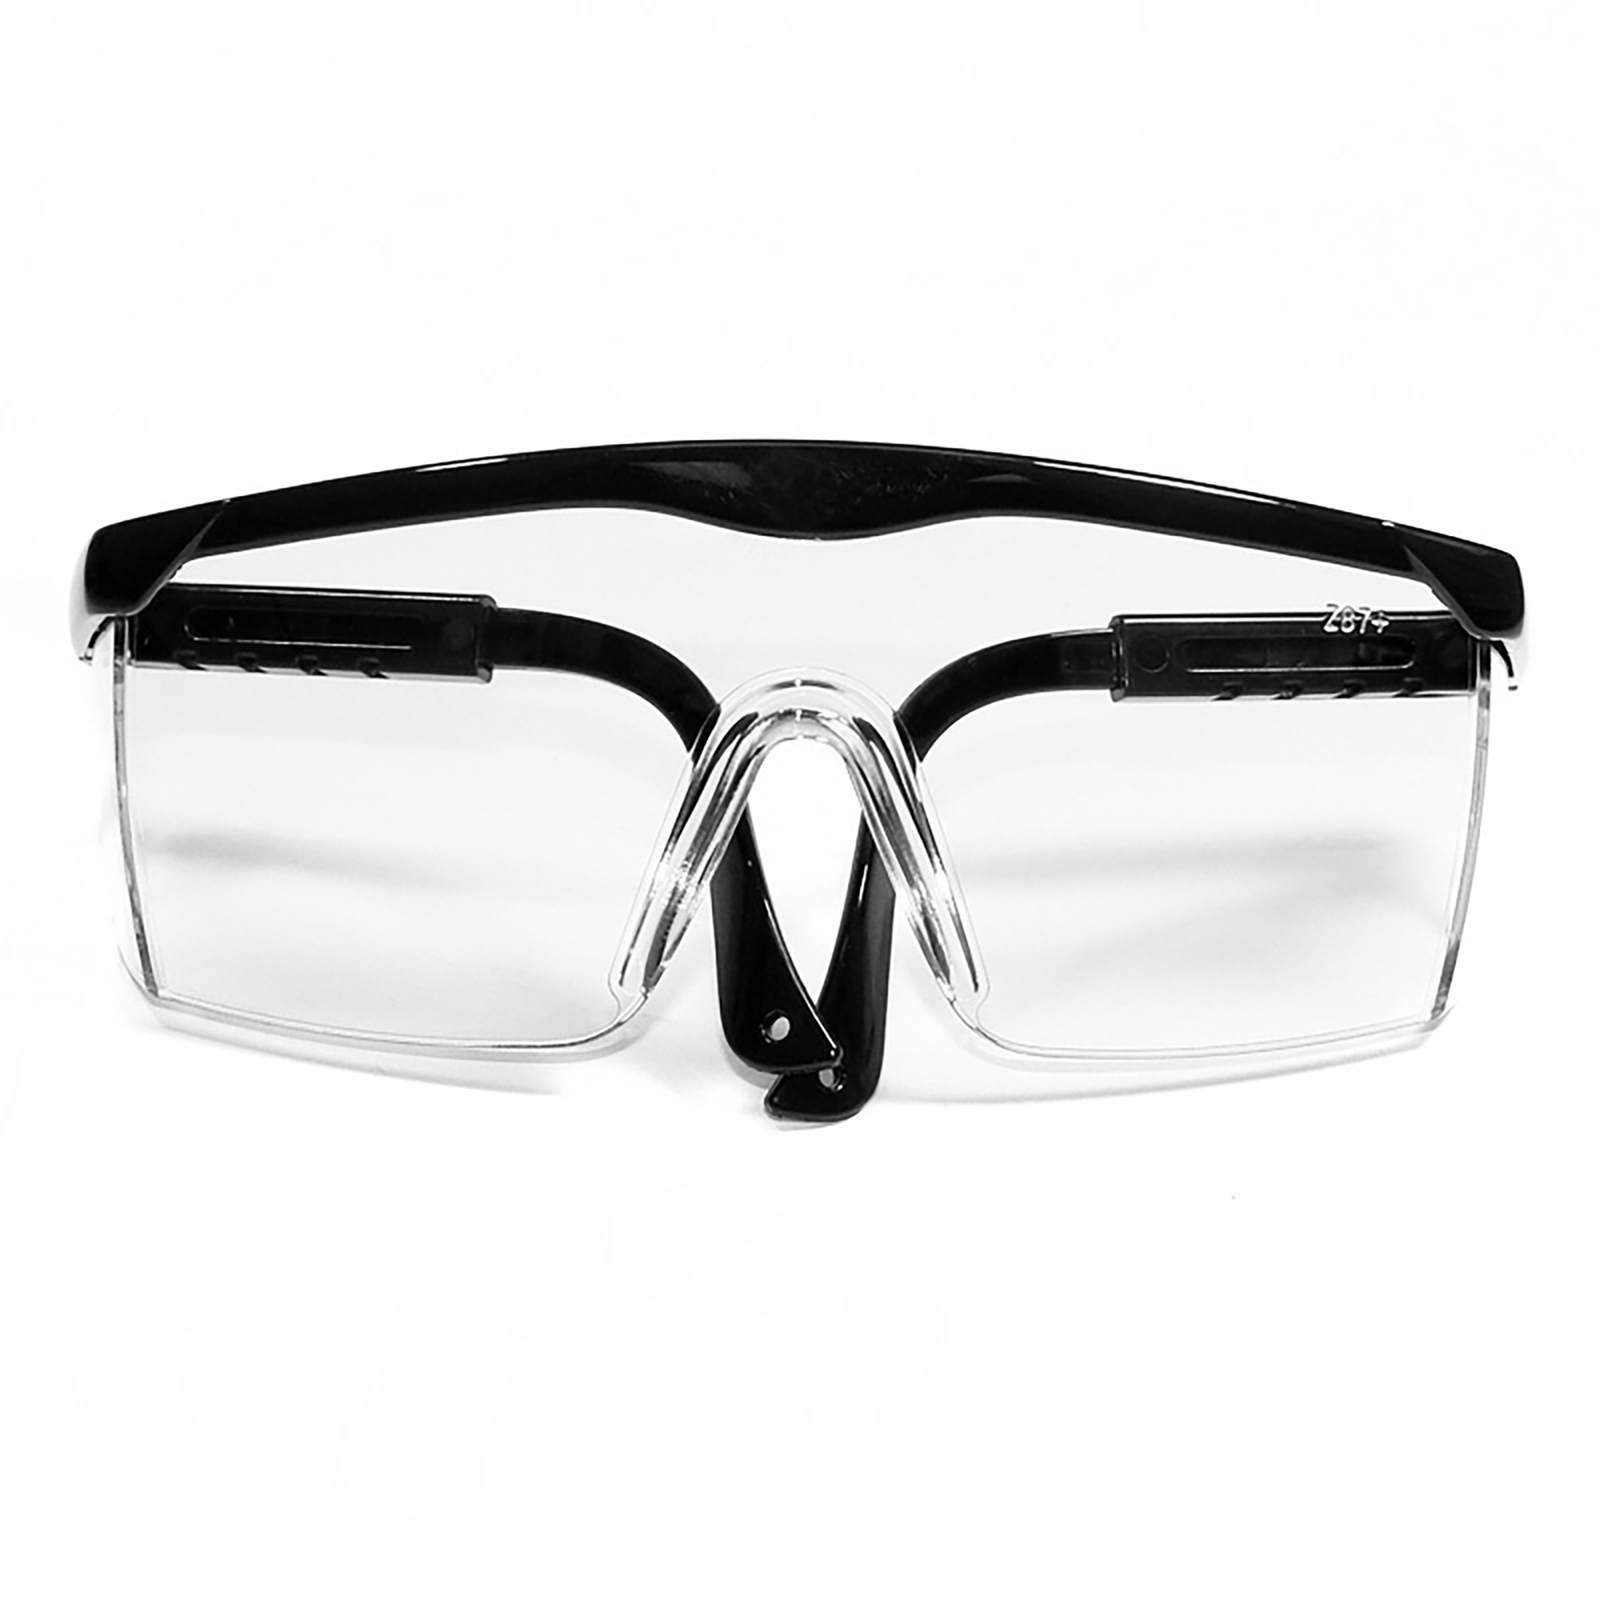 frontal view of the black framed rectangular Z87+ ANSI compliant safety clear glasses with side shields for high impact protection with adjustable temple legs